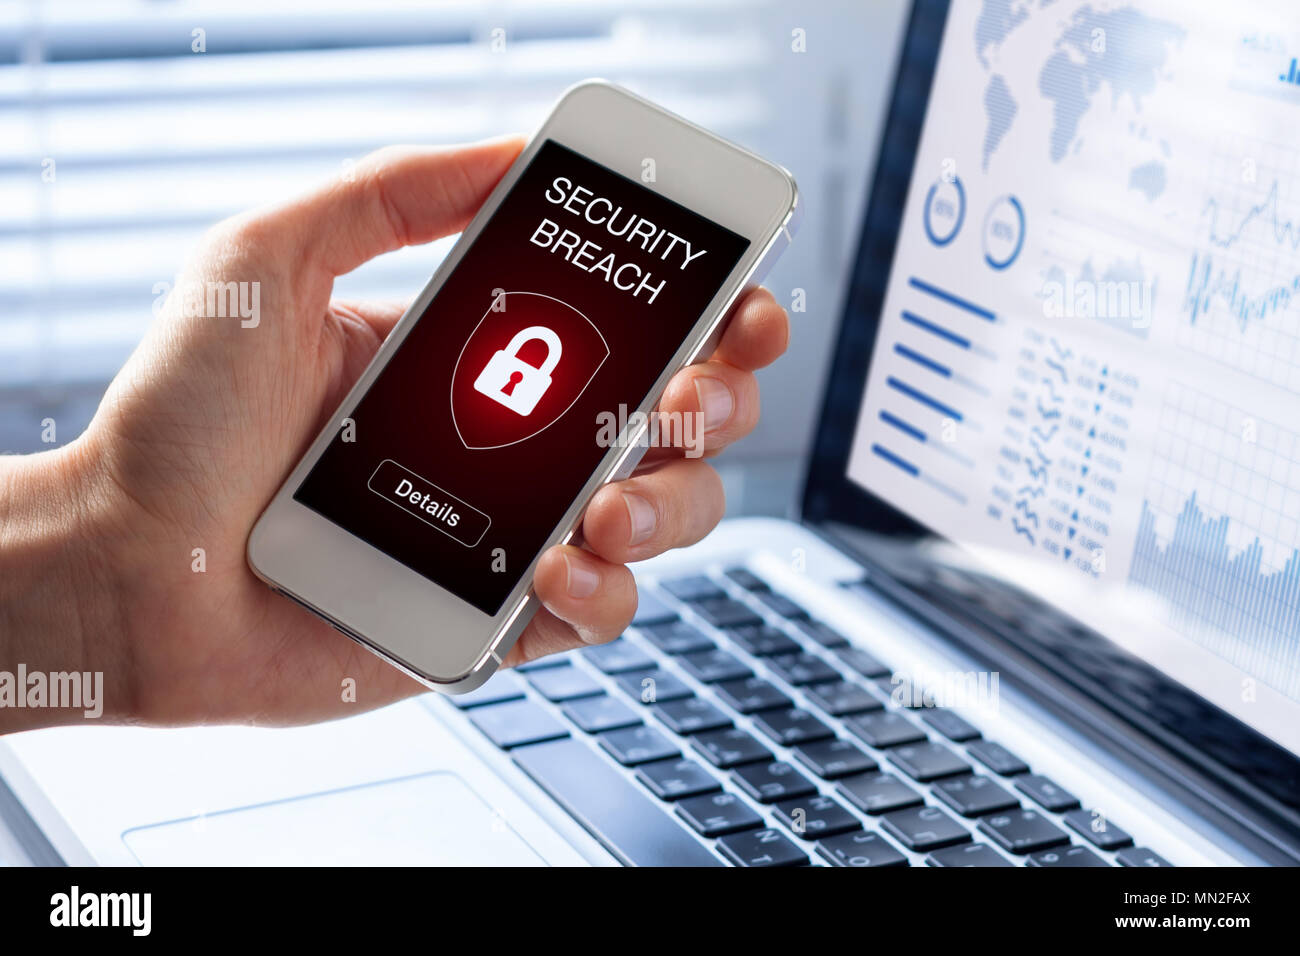 Security breach warning on smartphone screen, device infected by internet virus or malware after cyberattack by hacker, fraud alert with red padlock i Stock Photo